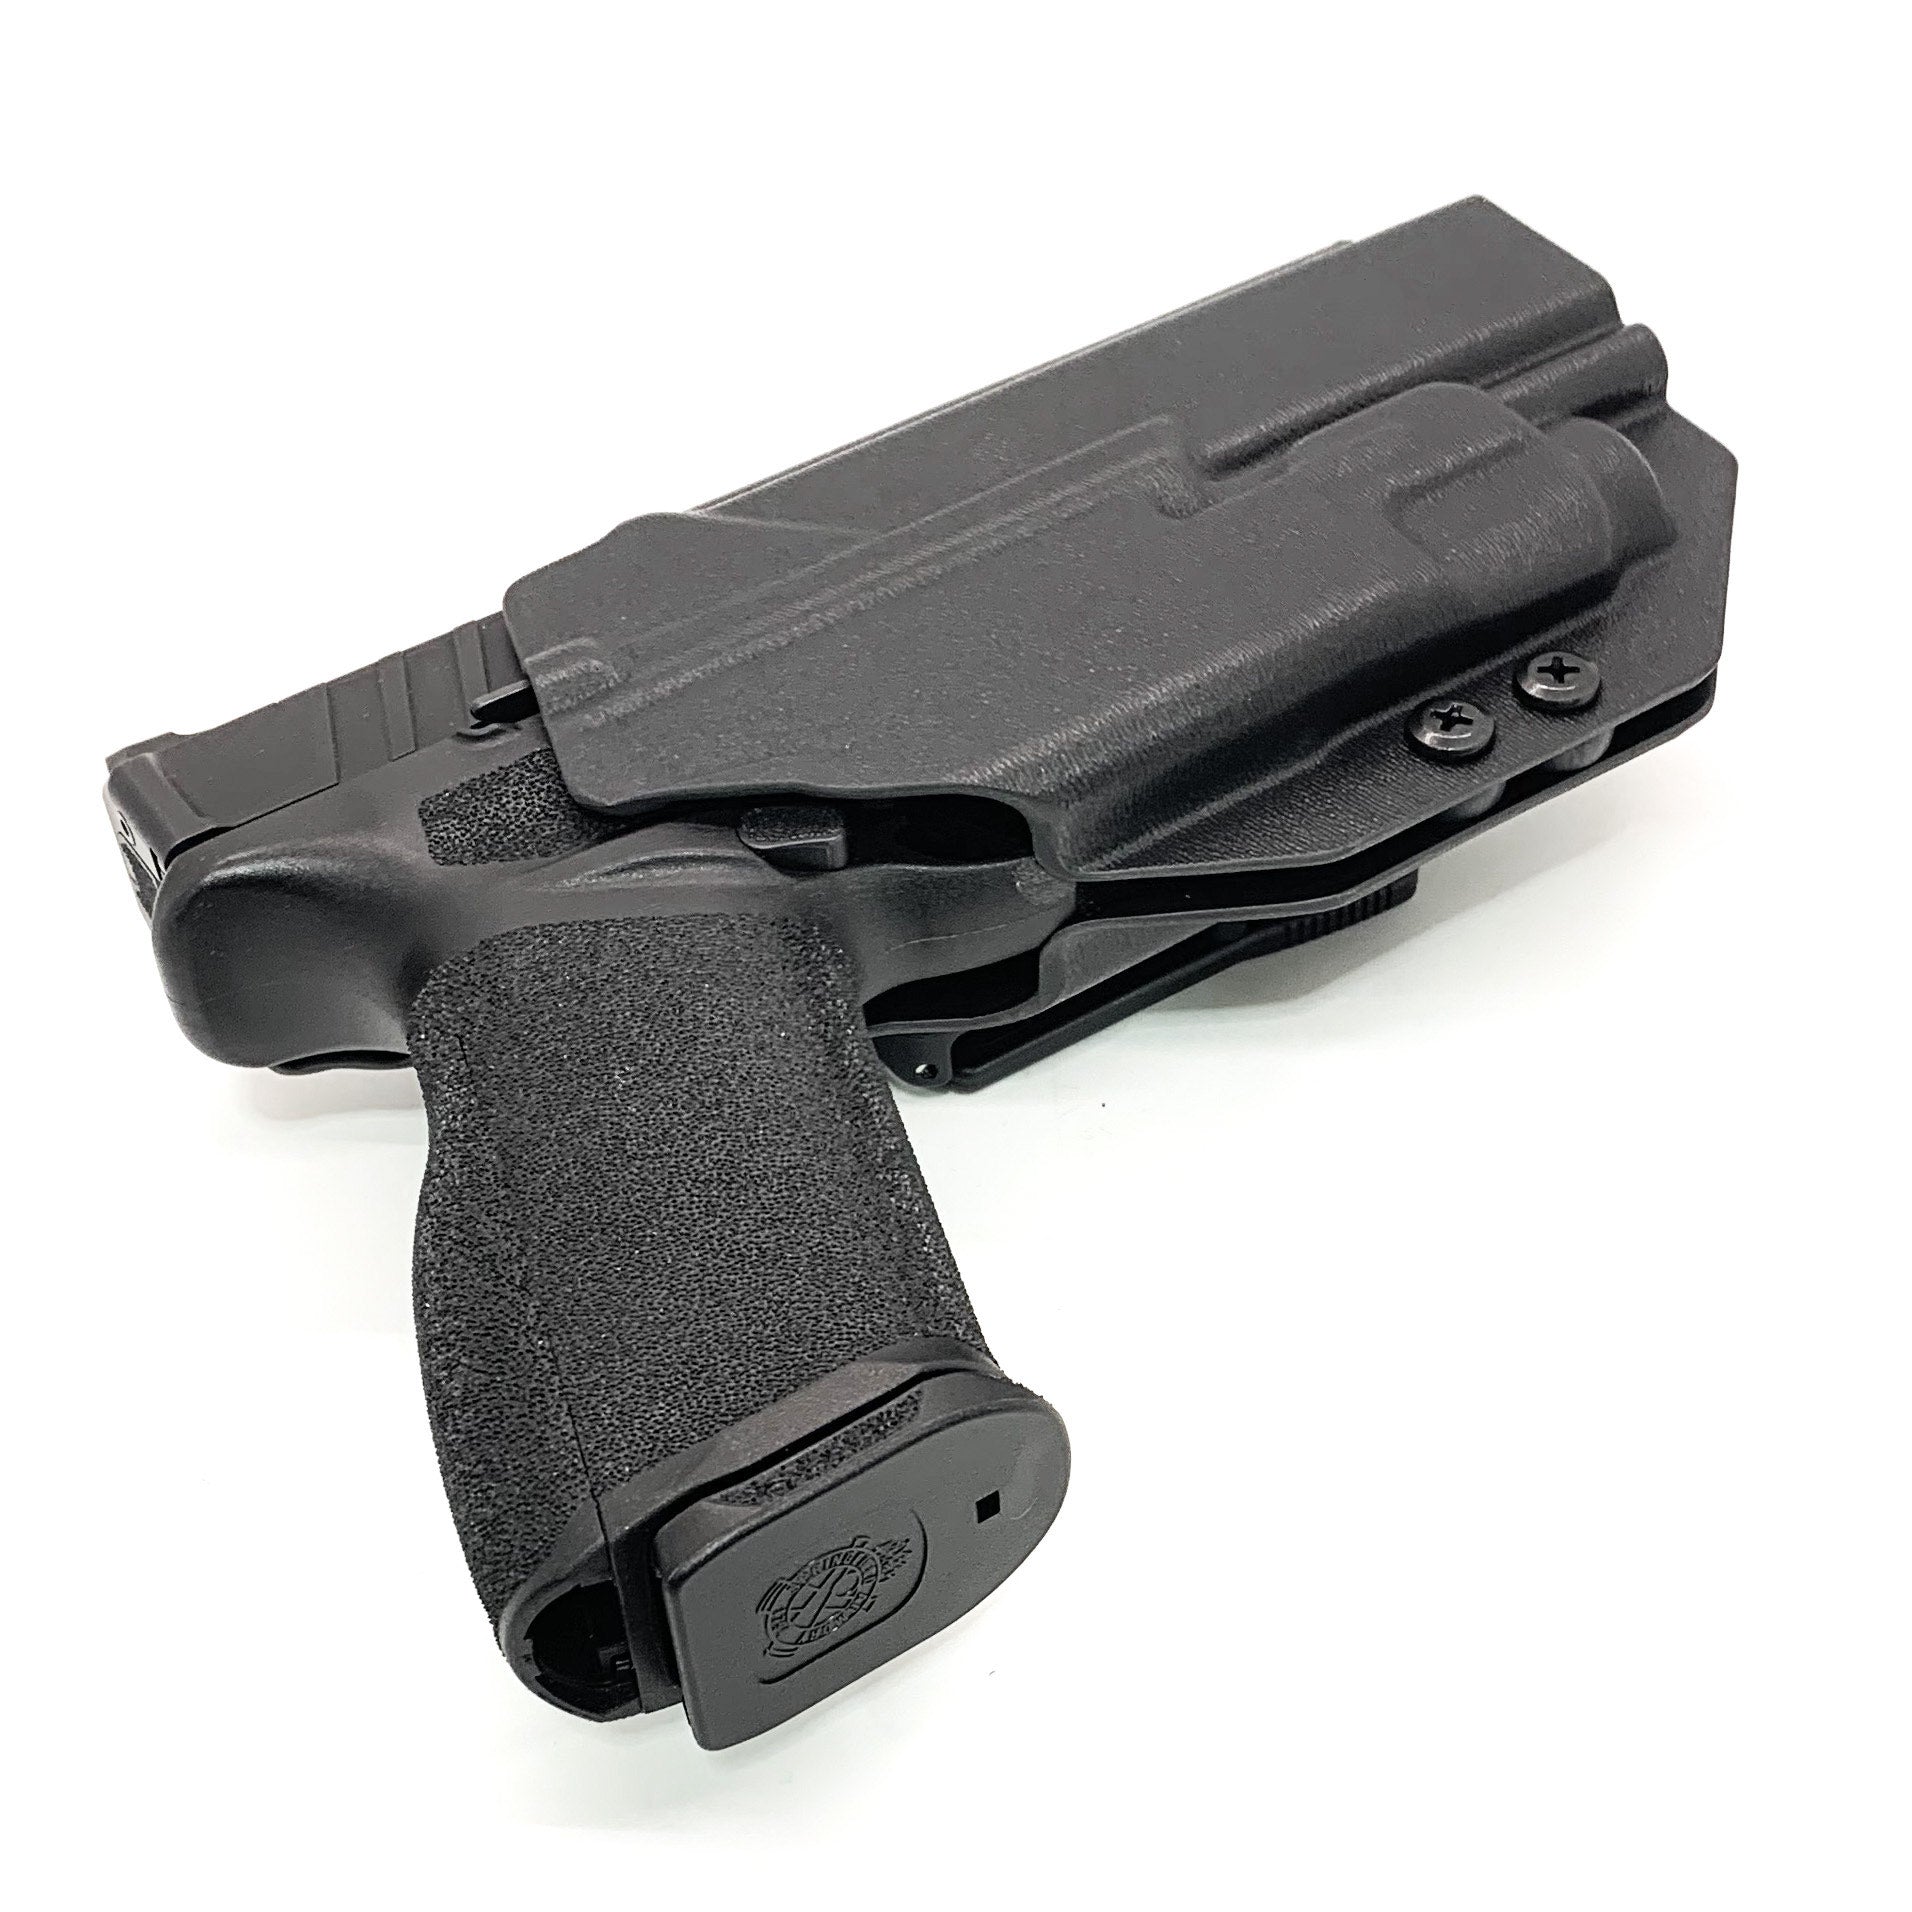 For the best, highest quality, OWB Outside Waistband Holster designed to fit the Springfield Armory Echelon and Streamlight TLR-7A, shop Four Brothers Holters. Cleared for a red dot sight. Full sweat guard, adjustable retention, minimal material, and smooth edges to reduce printing. Proudly made in the USA.